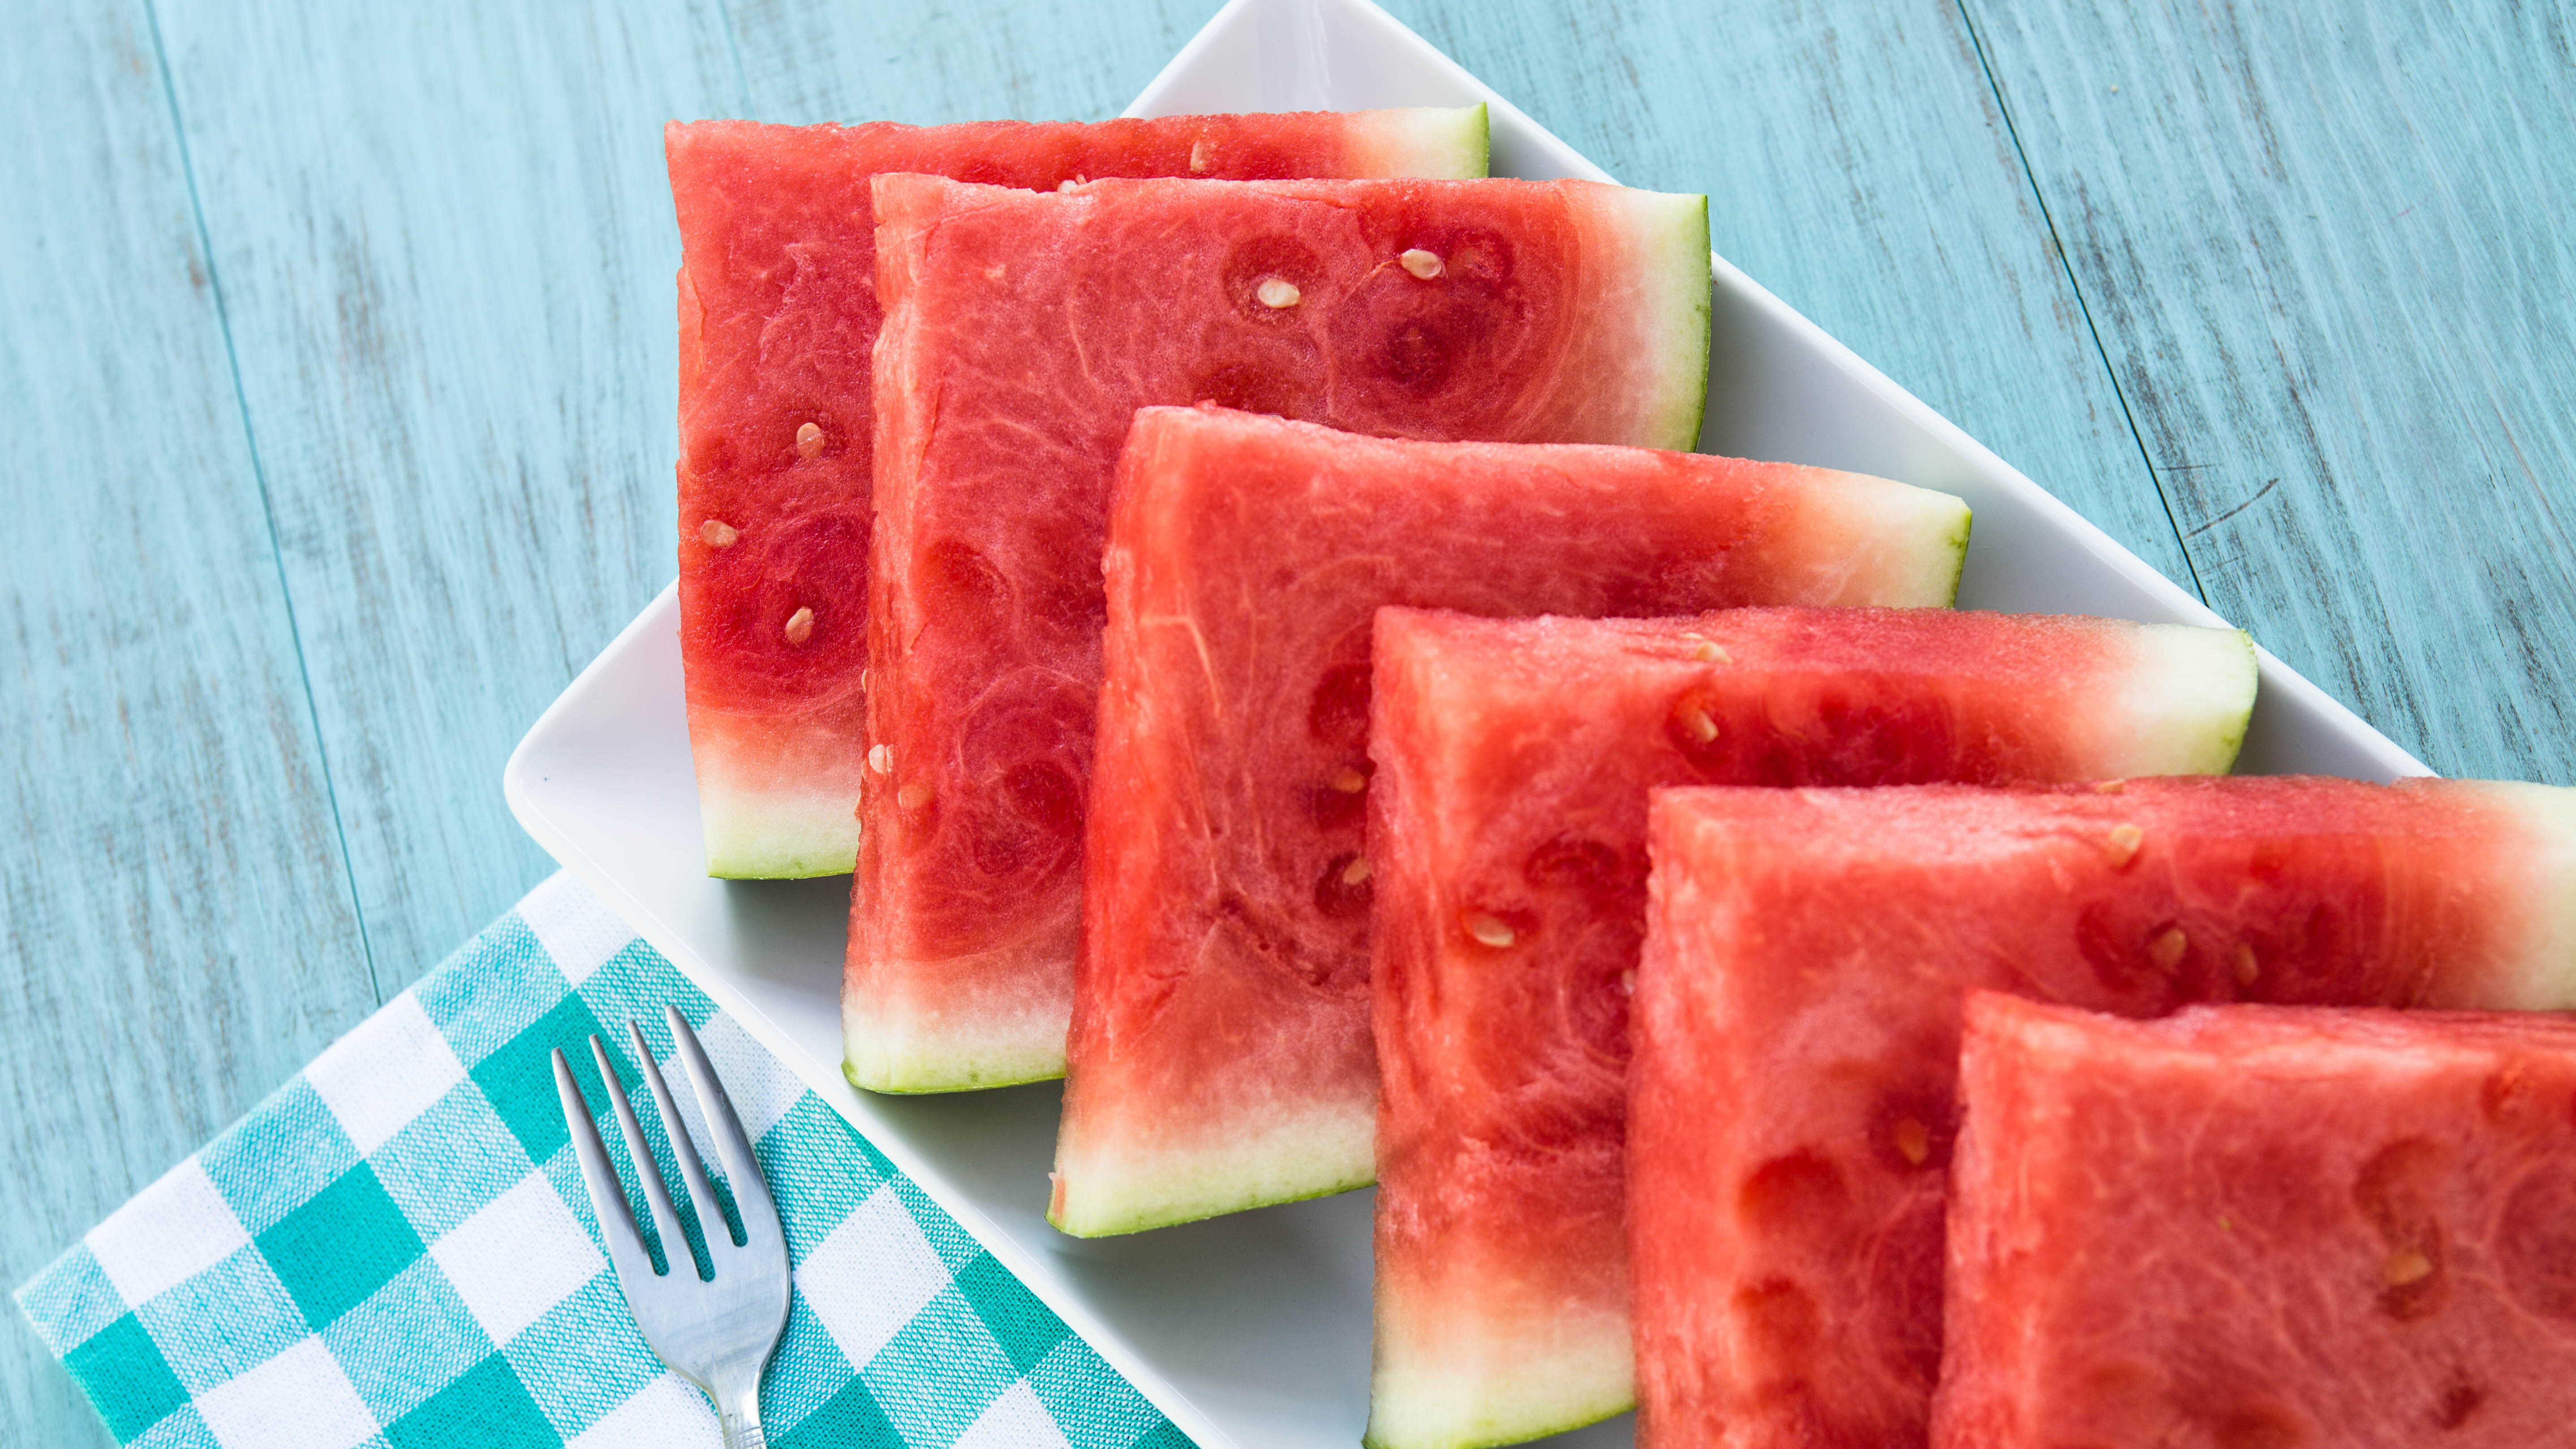 How to cut a watermelon in 3 easy steps